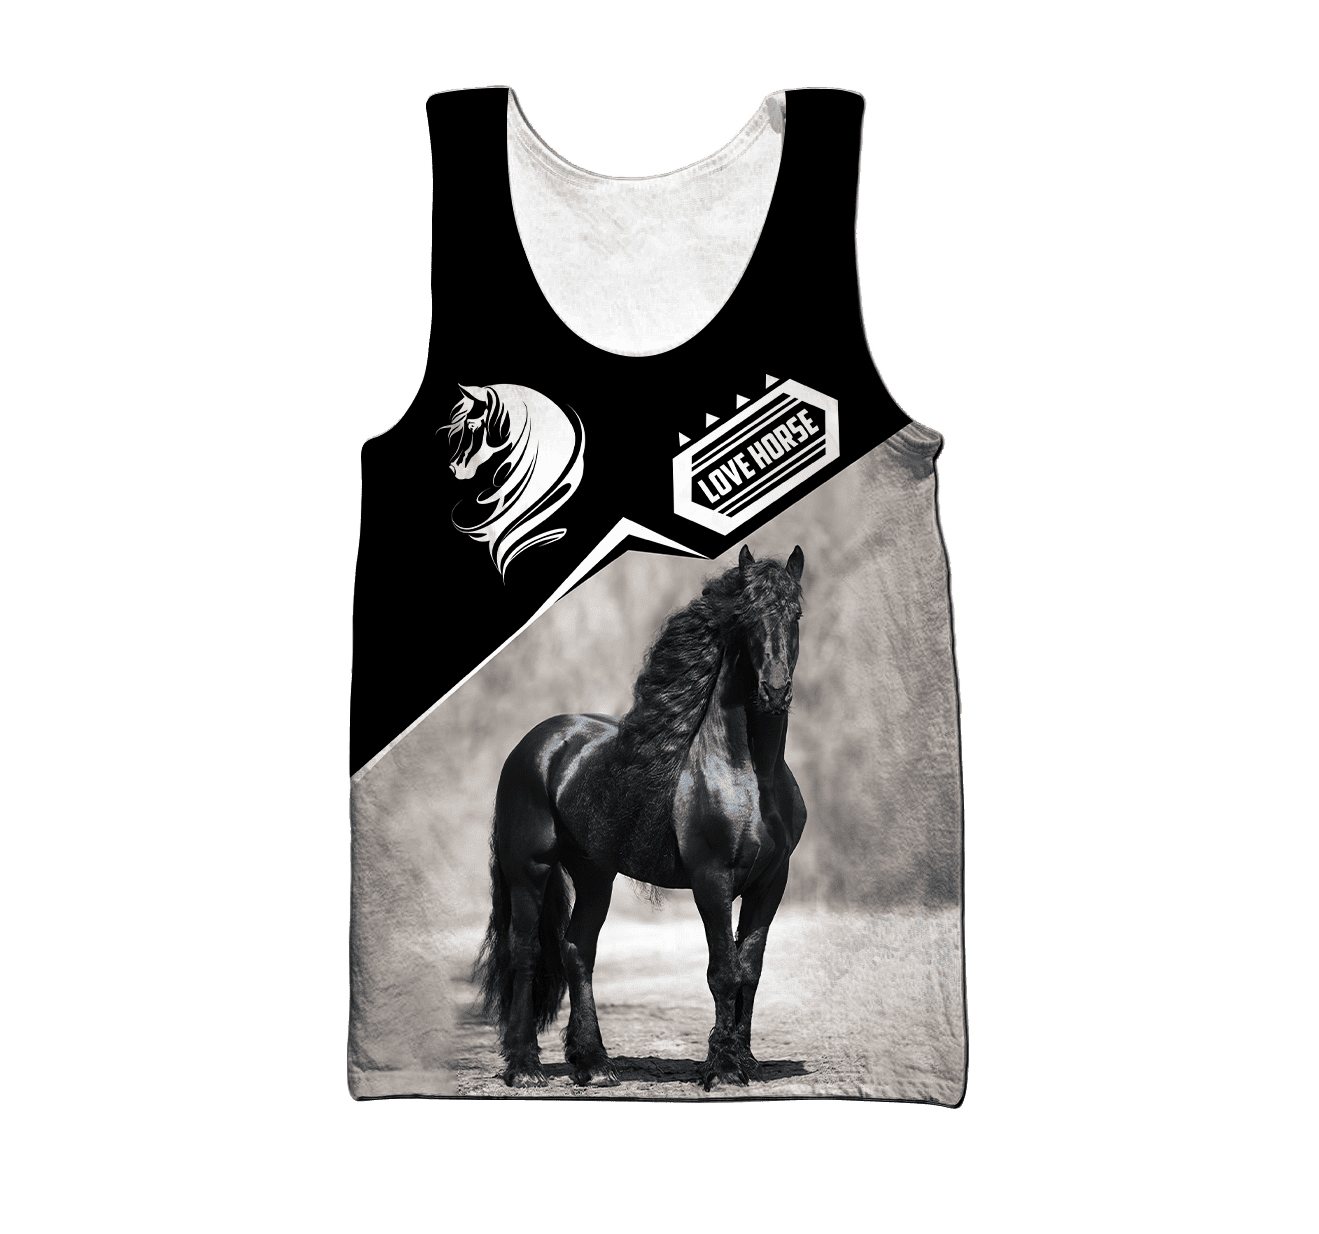 Personalized Name Friesian Horse 3D All Over Printed Unisex Shirt5